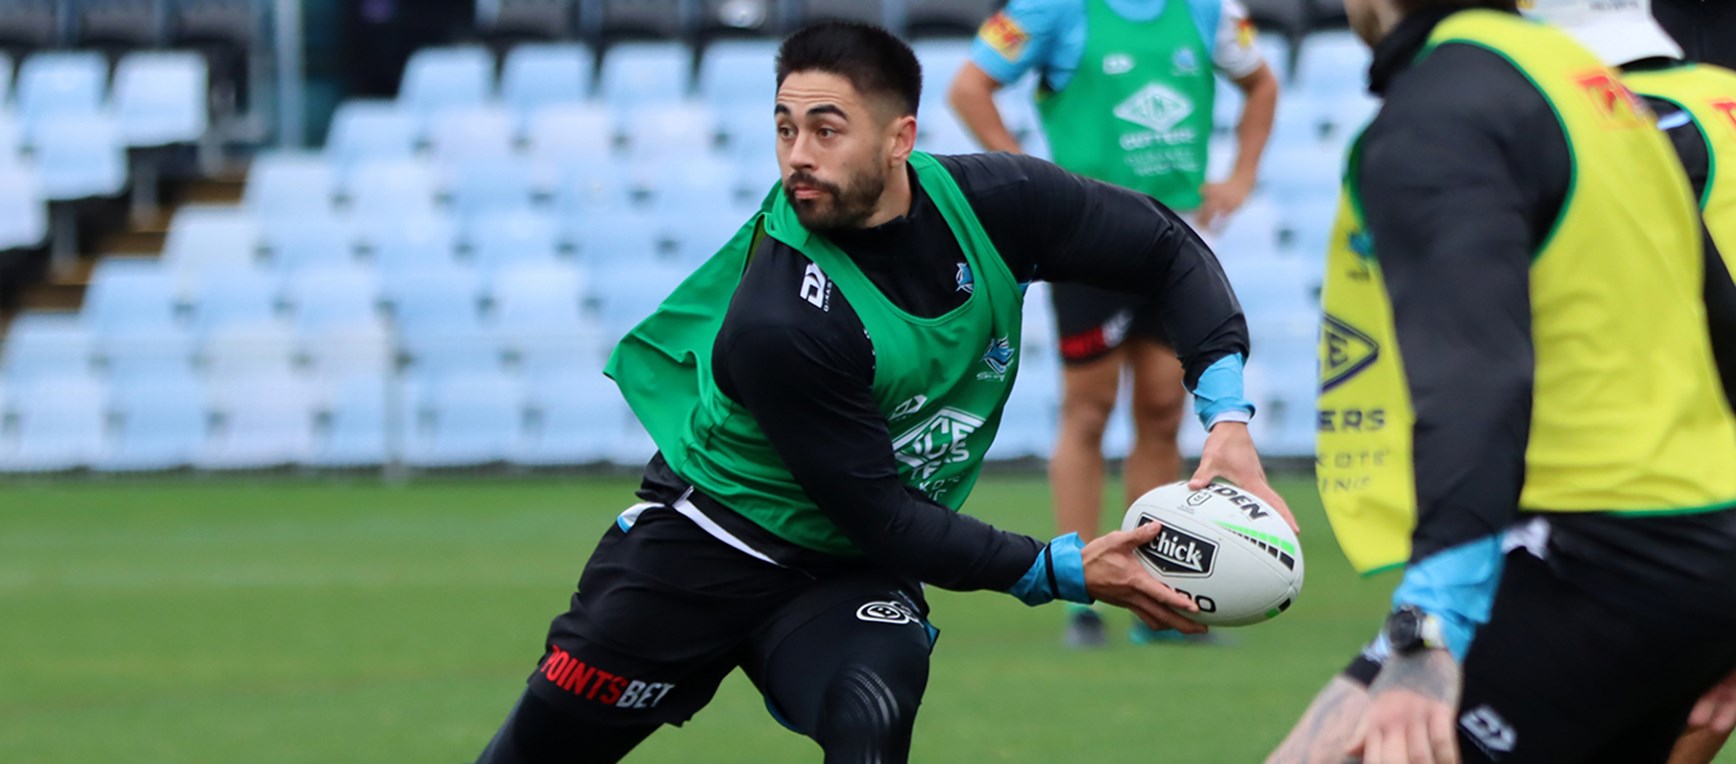 Sharks prepare for the Warriors